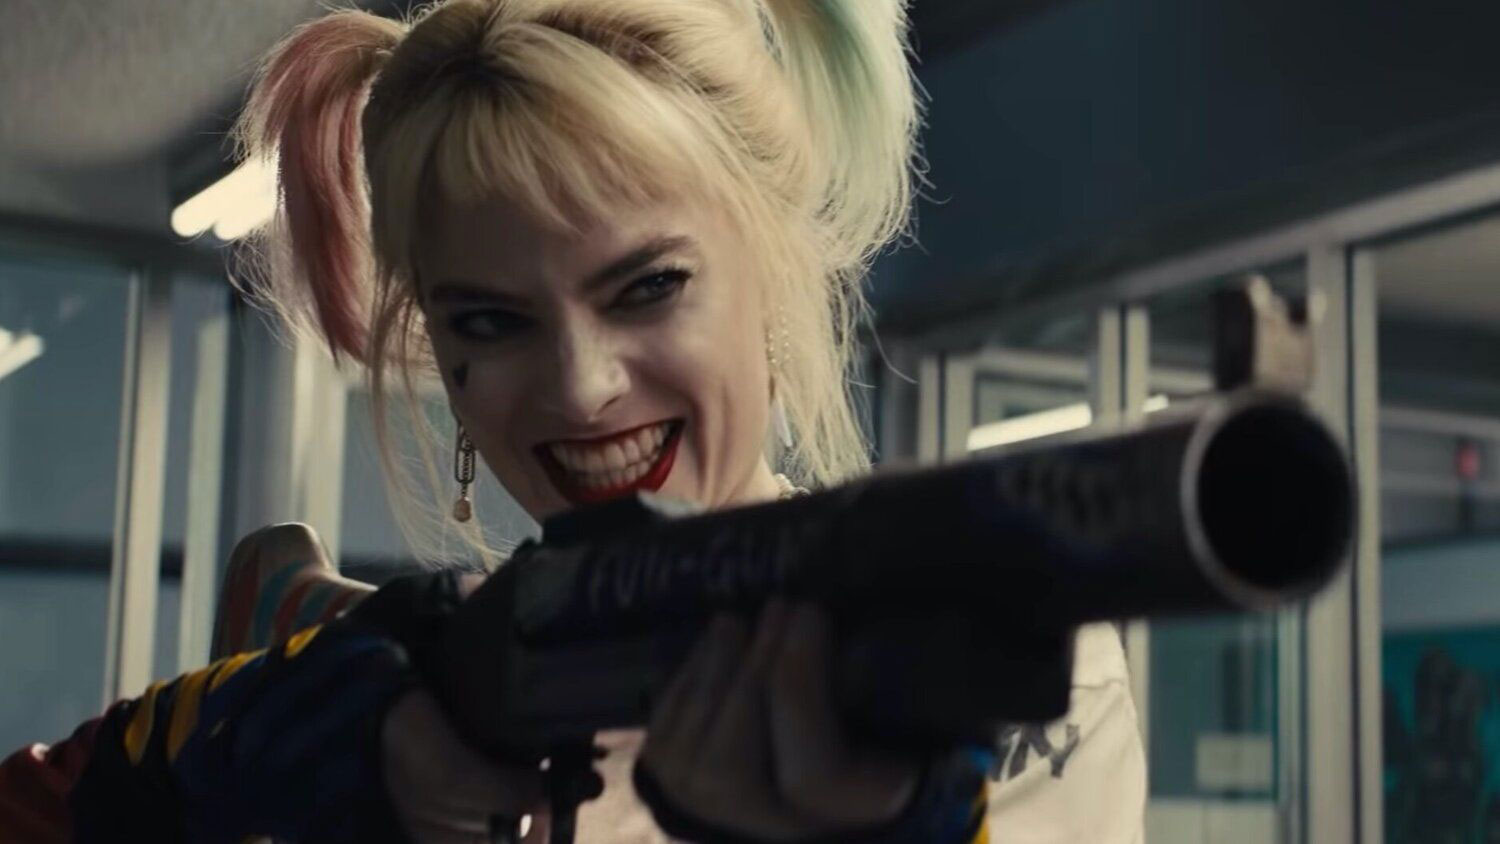 Harley quinn suicide squad wallpaper